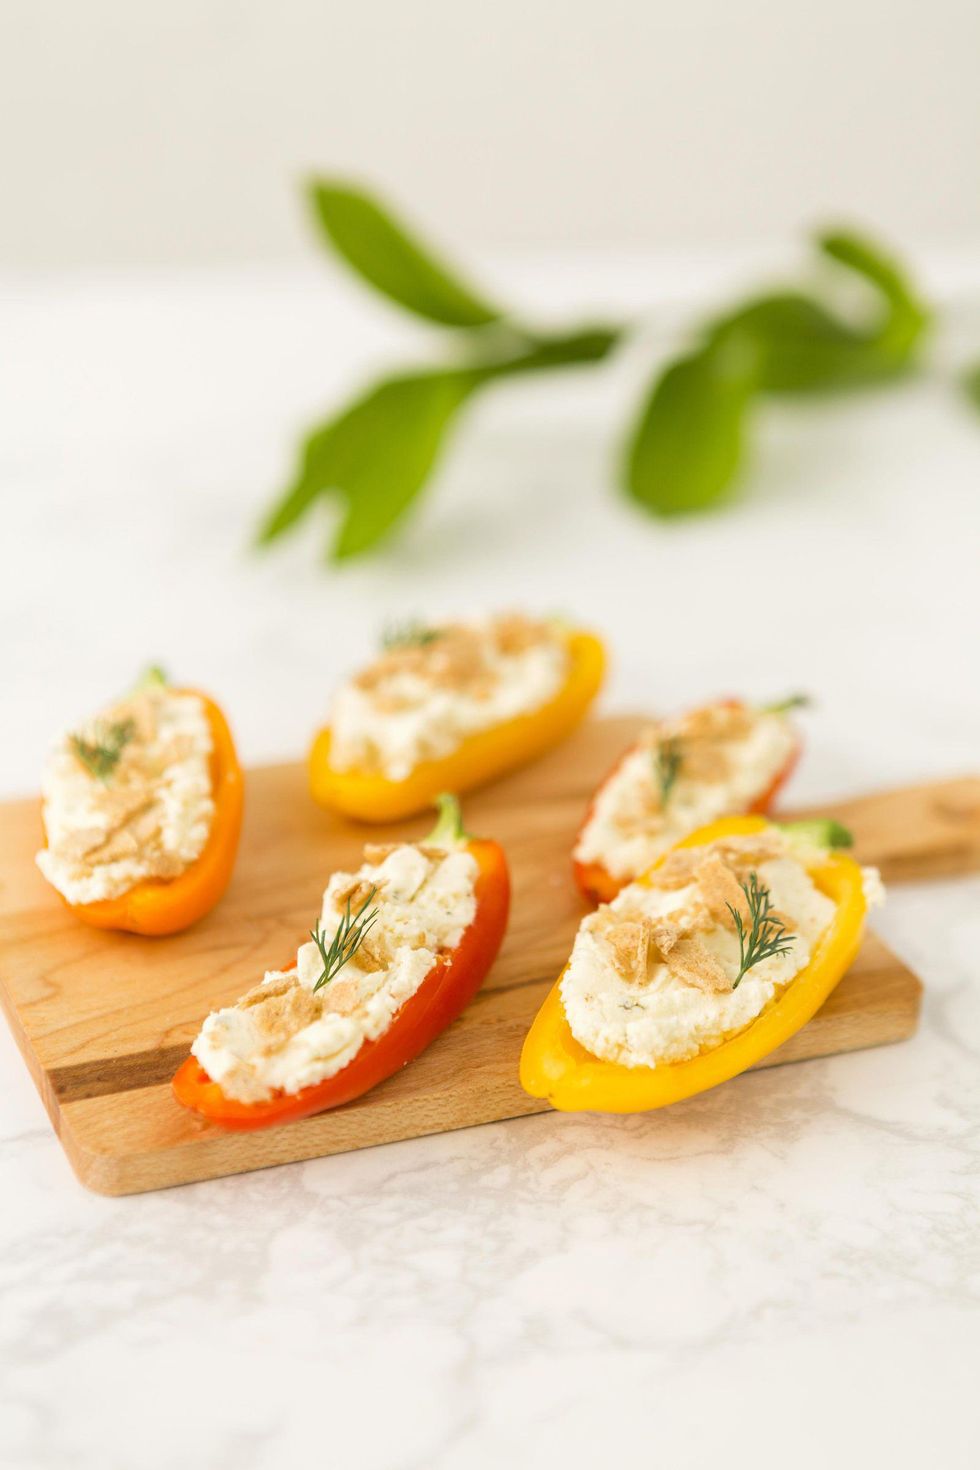 Mini peppers stuffed with cheese recipes for back to school